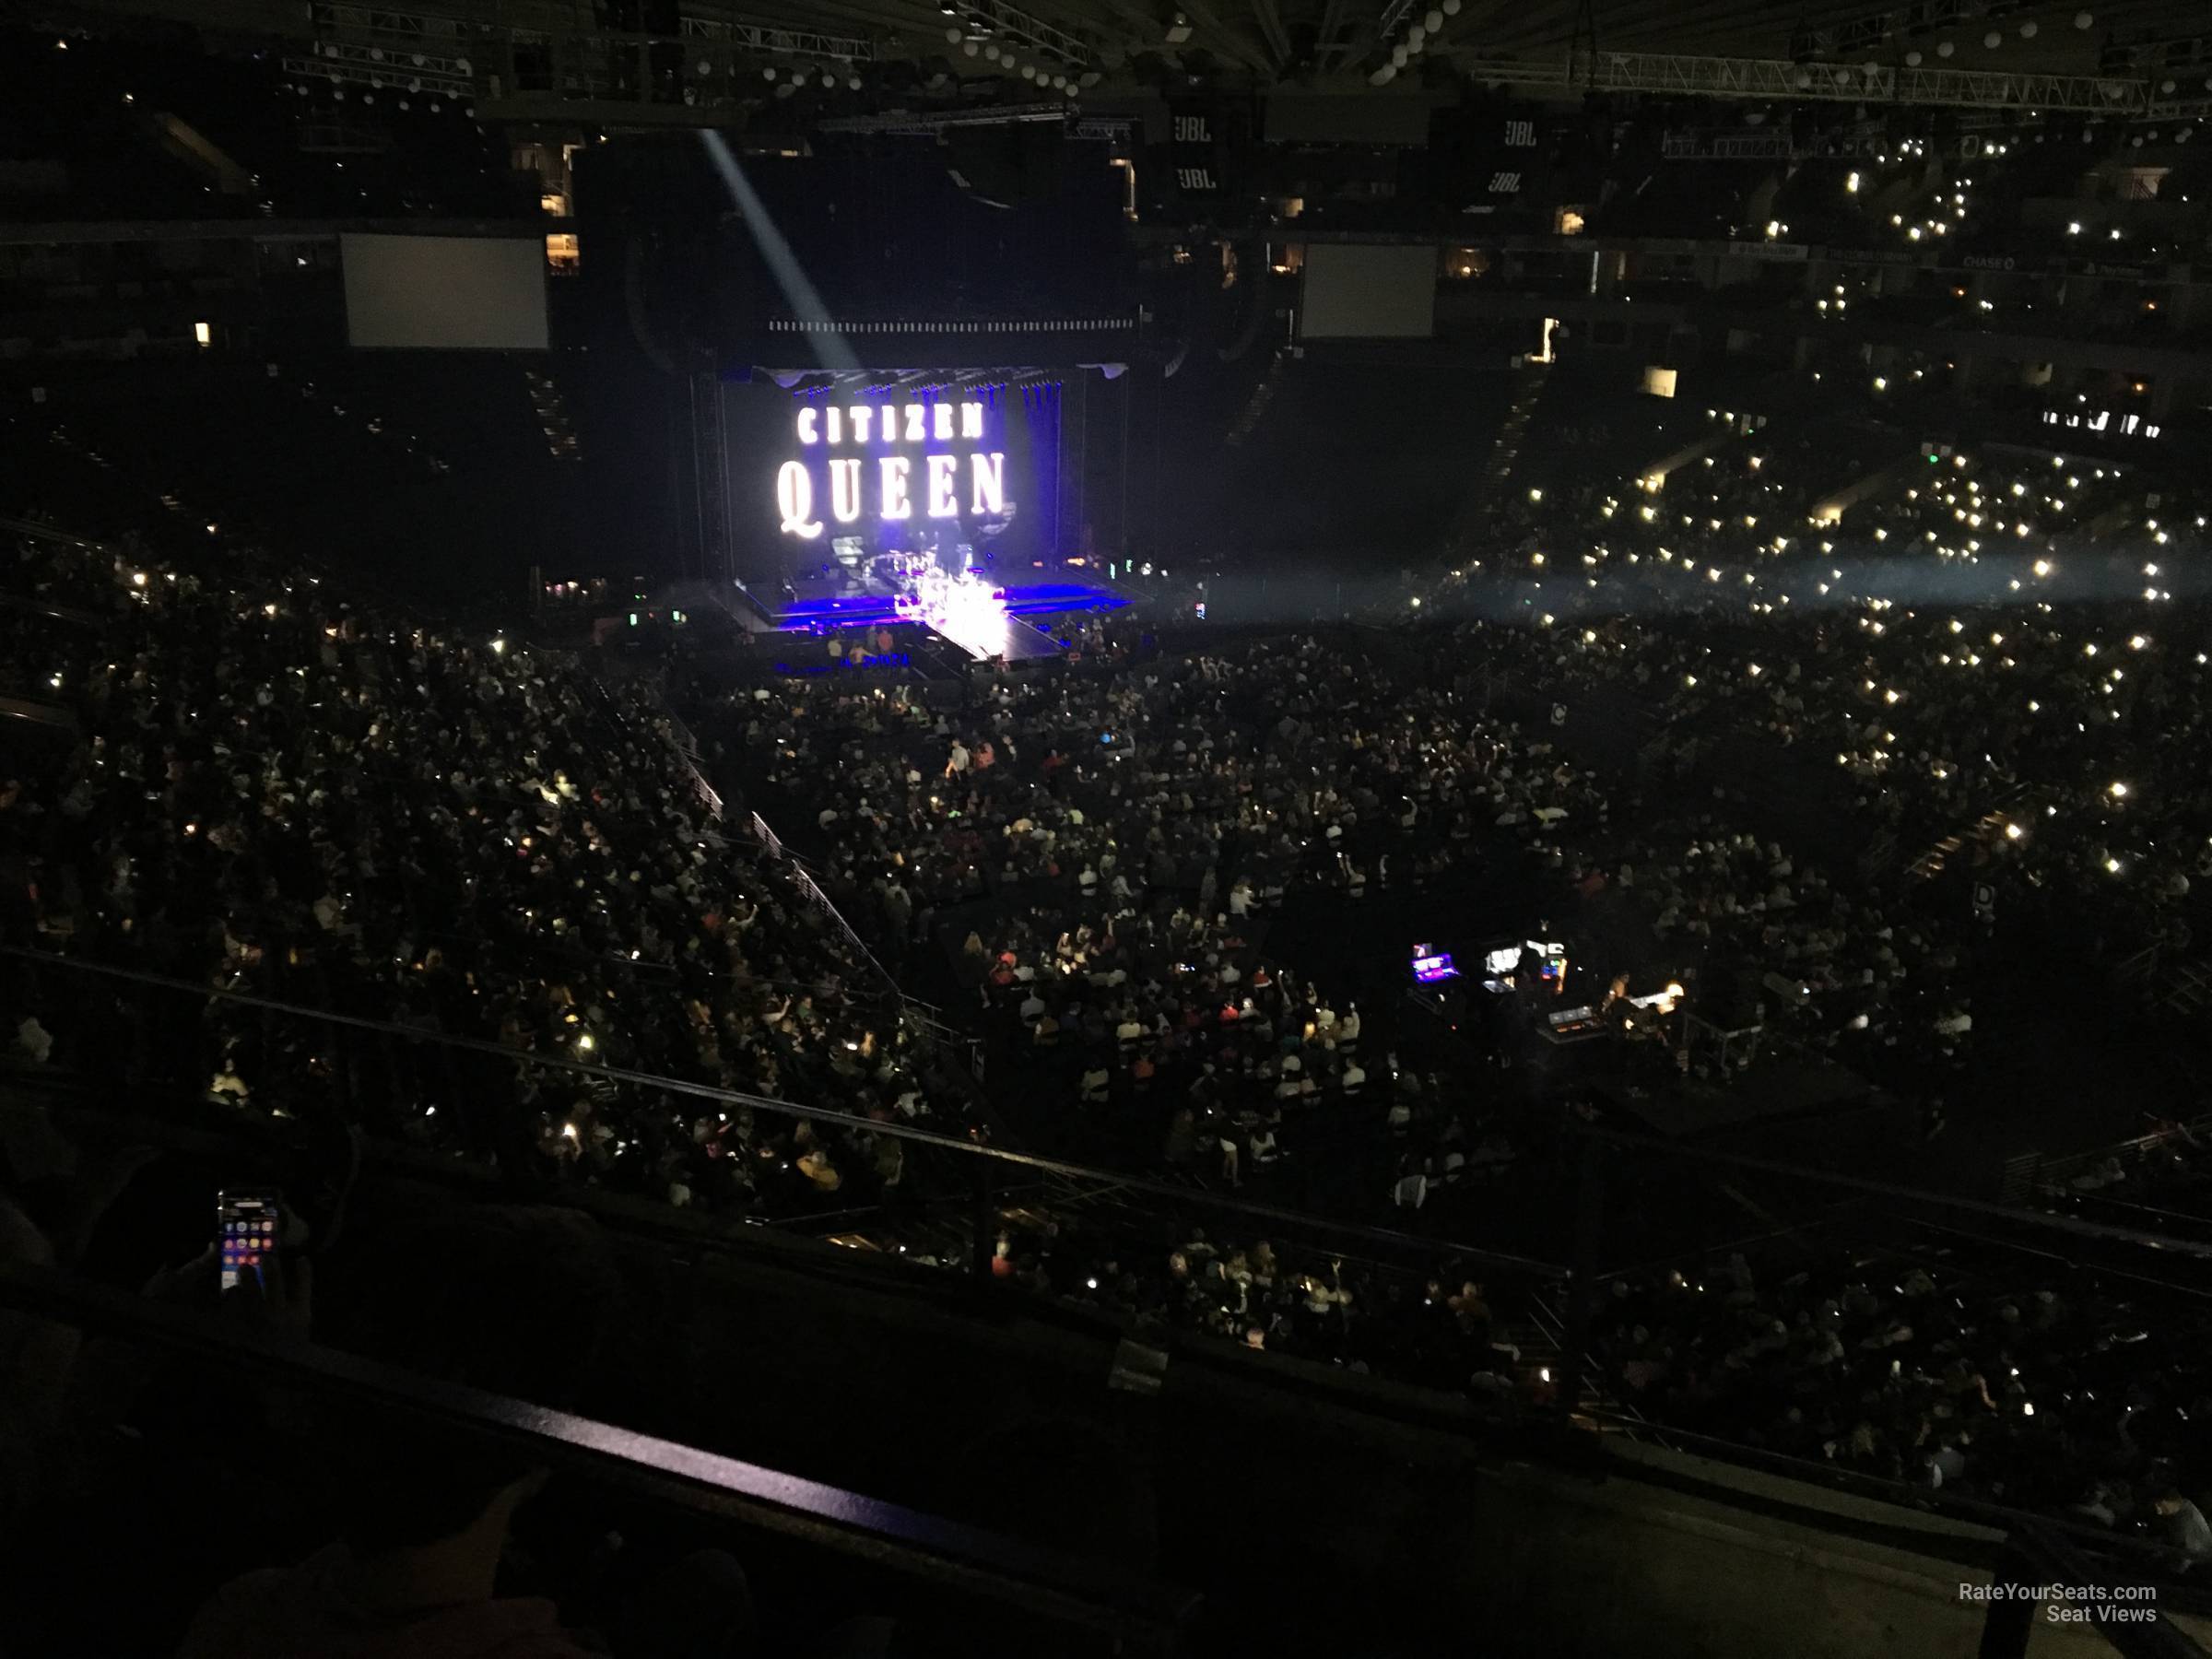 section 212, row 3 seat view  - oakland arena